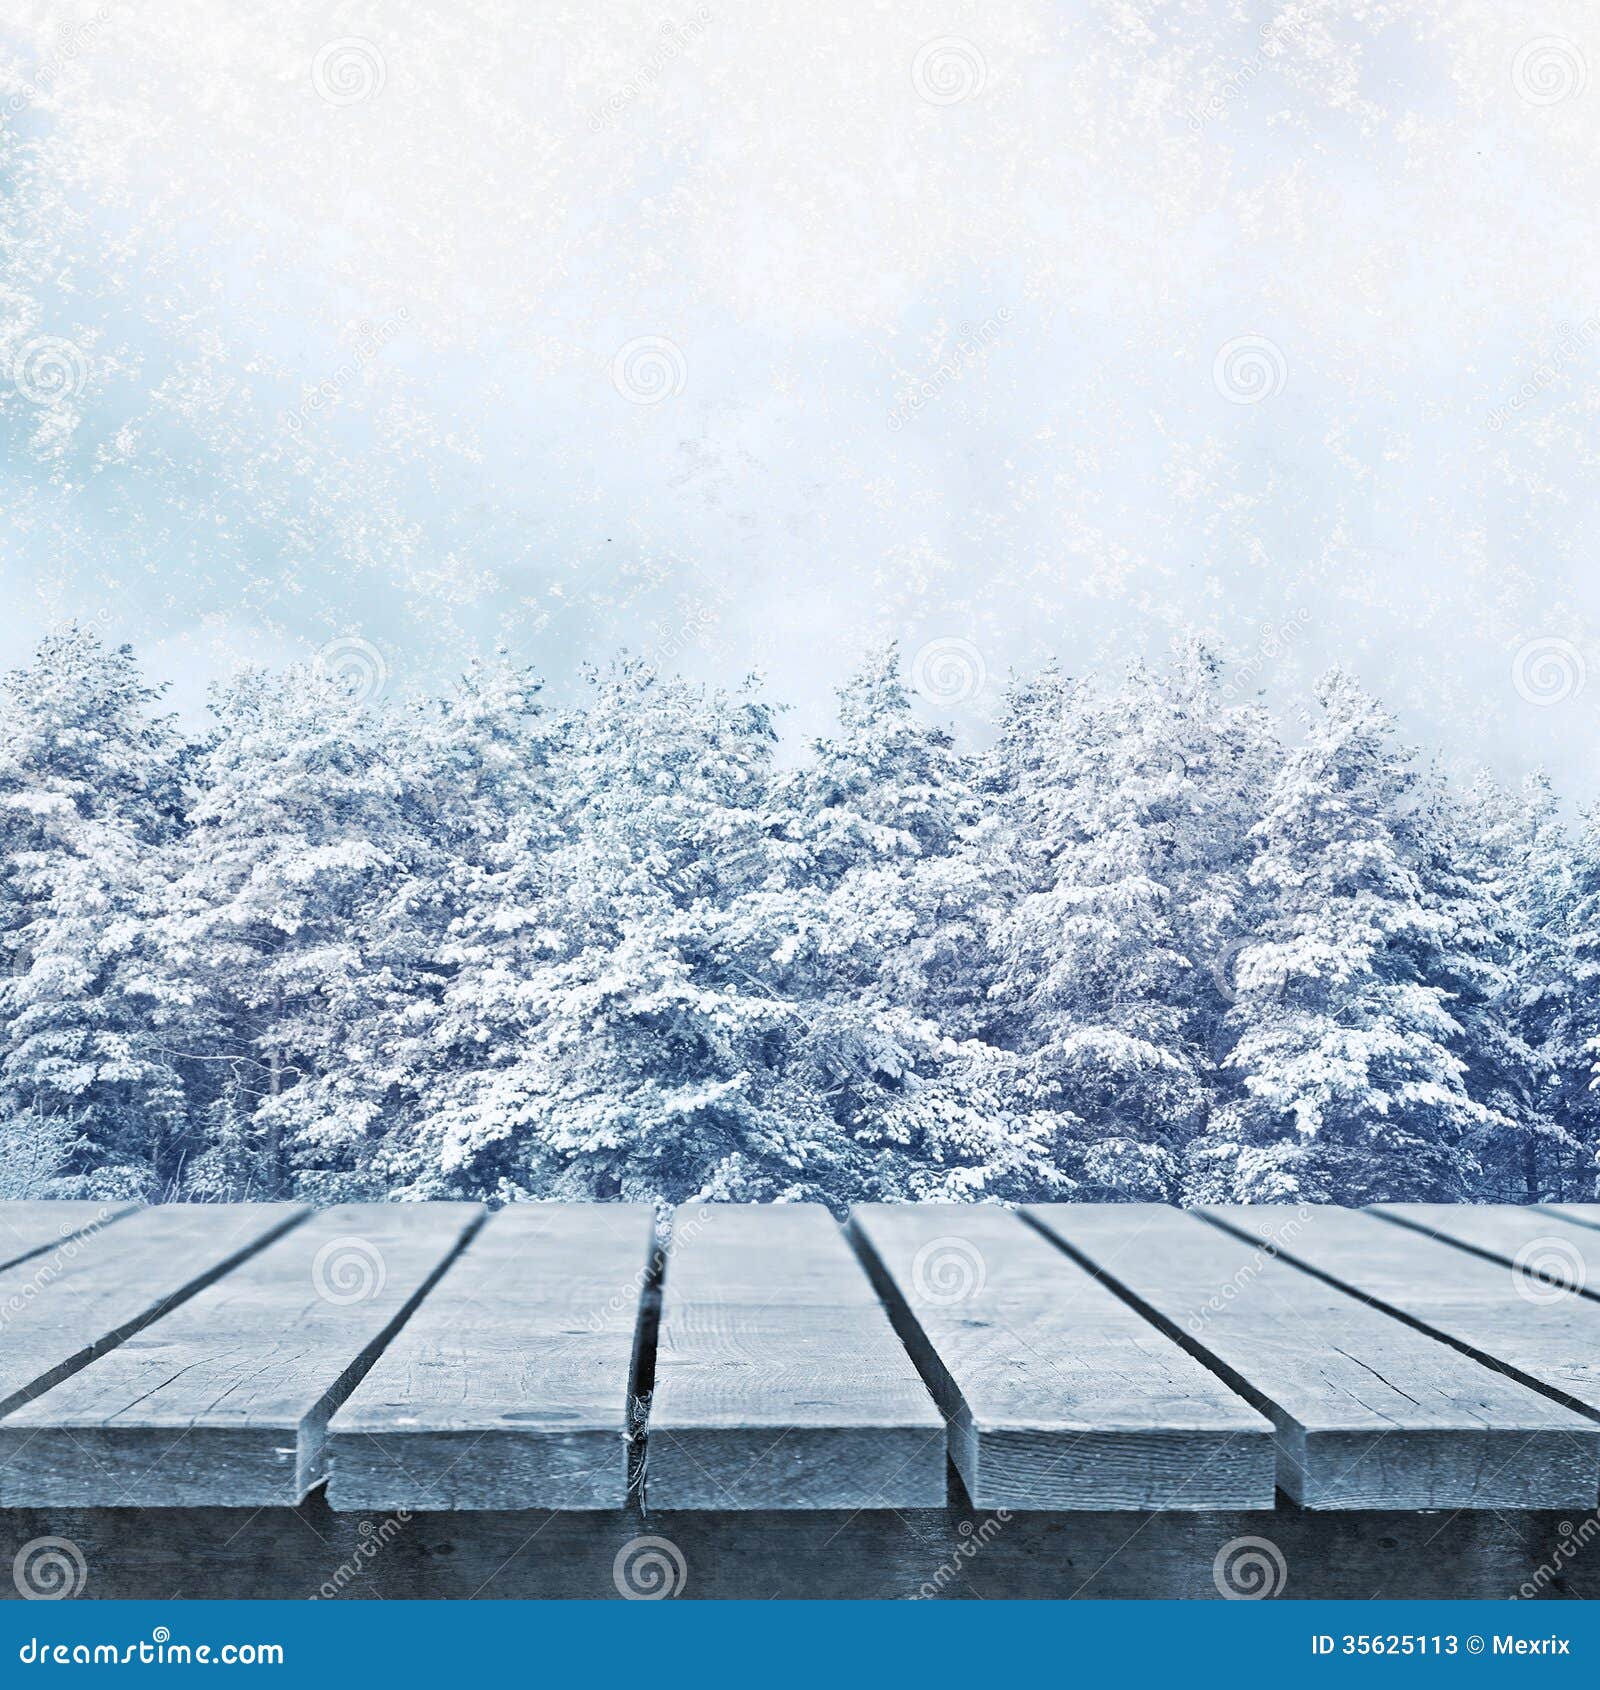 Winter scenic stock image. Image of outdoor, christmas ...